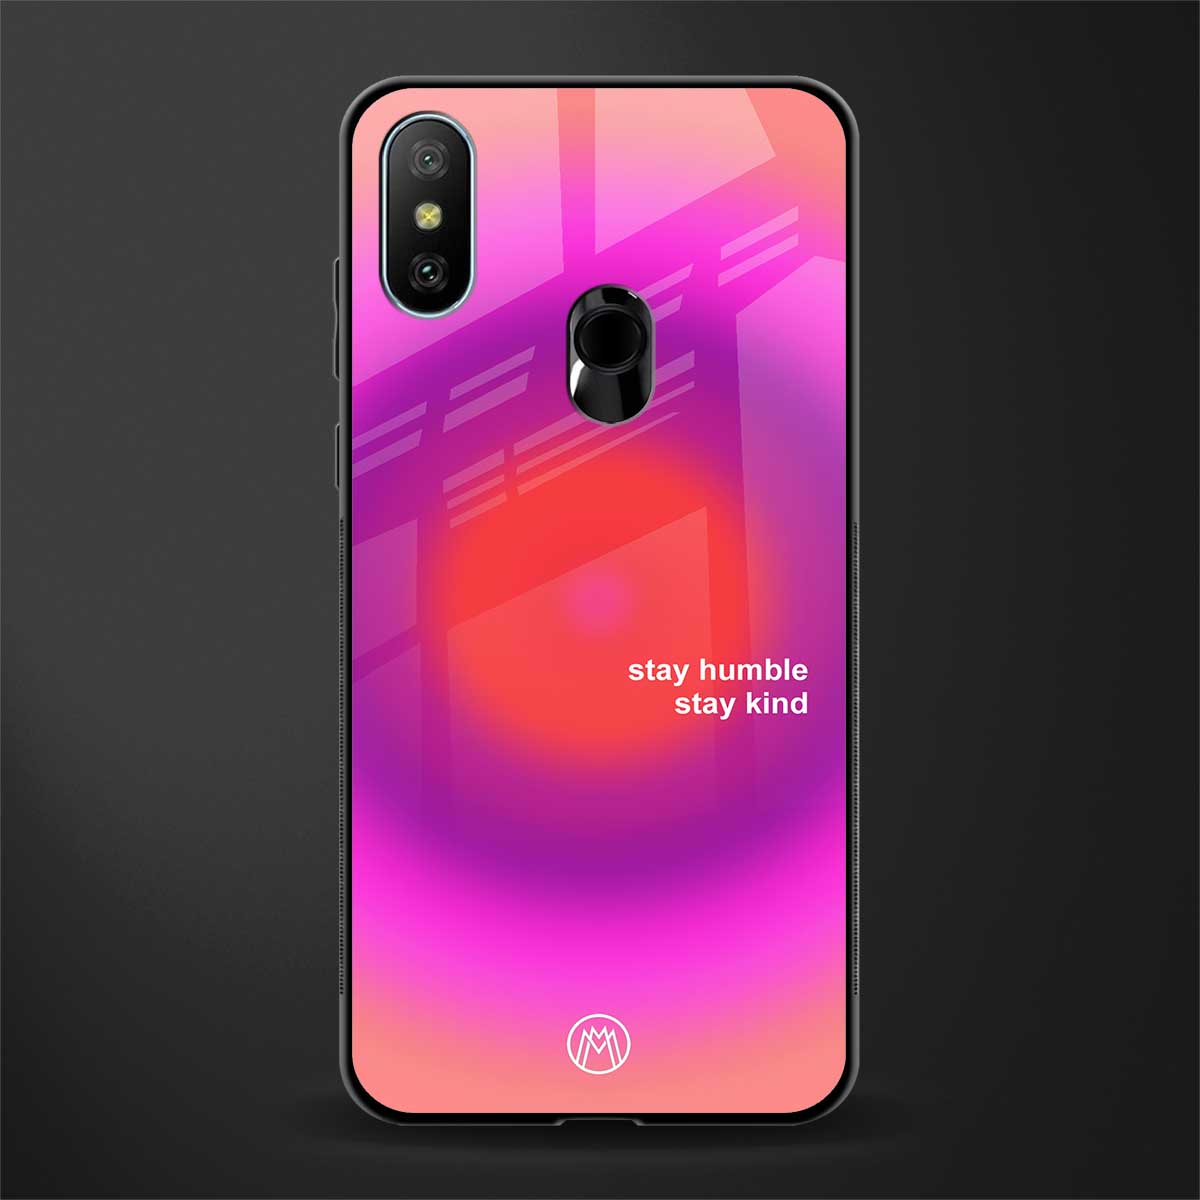 stay kind glass case for redmi 6 pro image